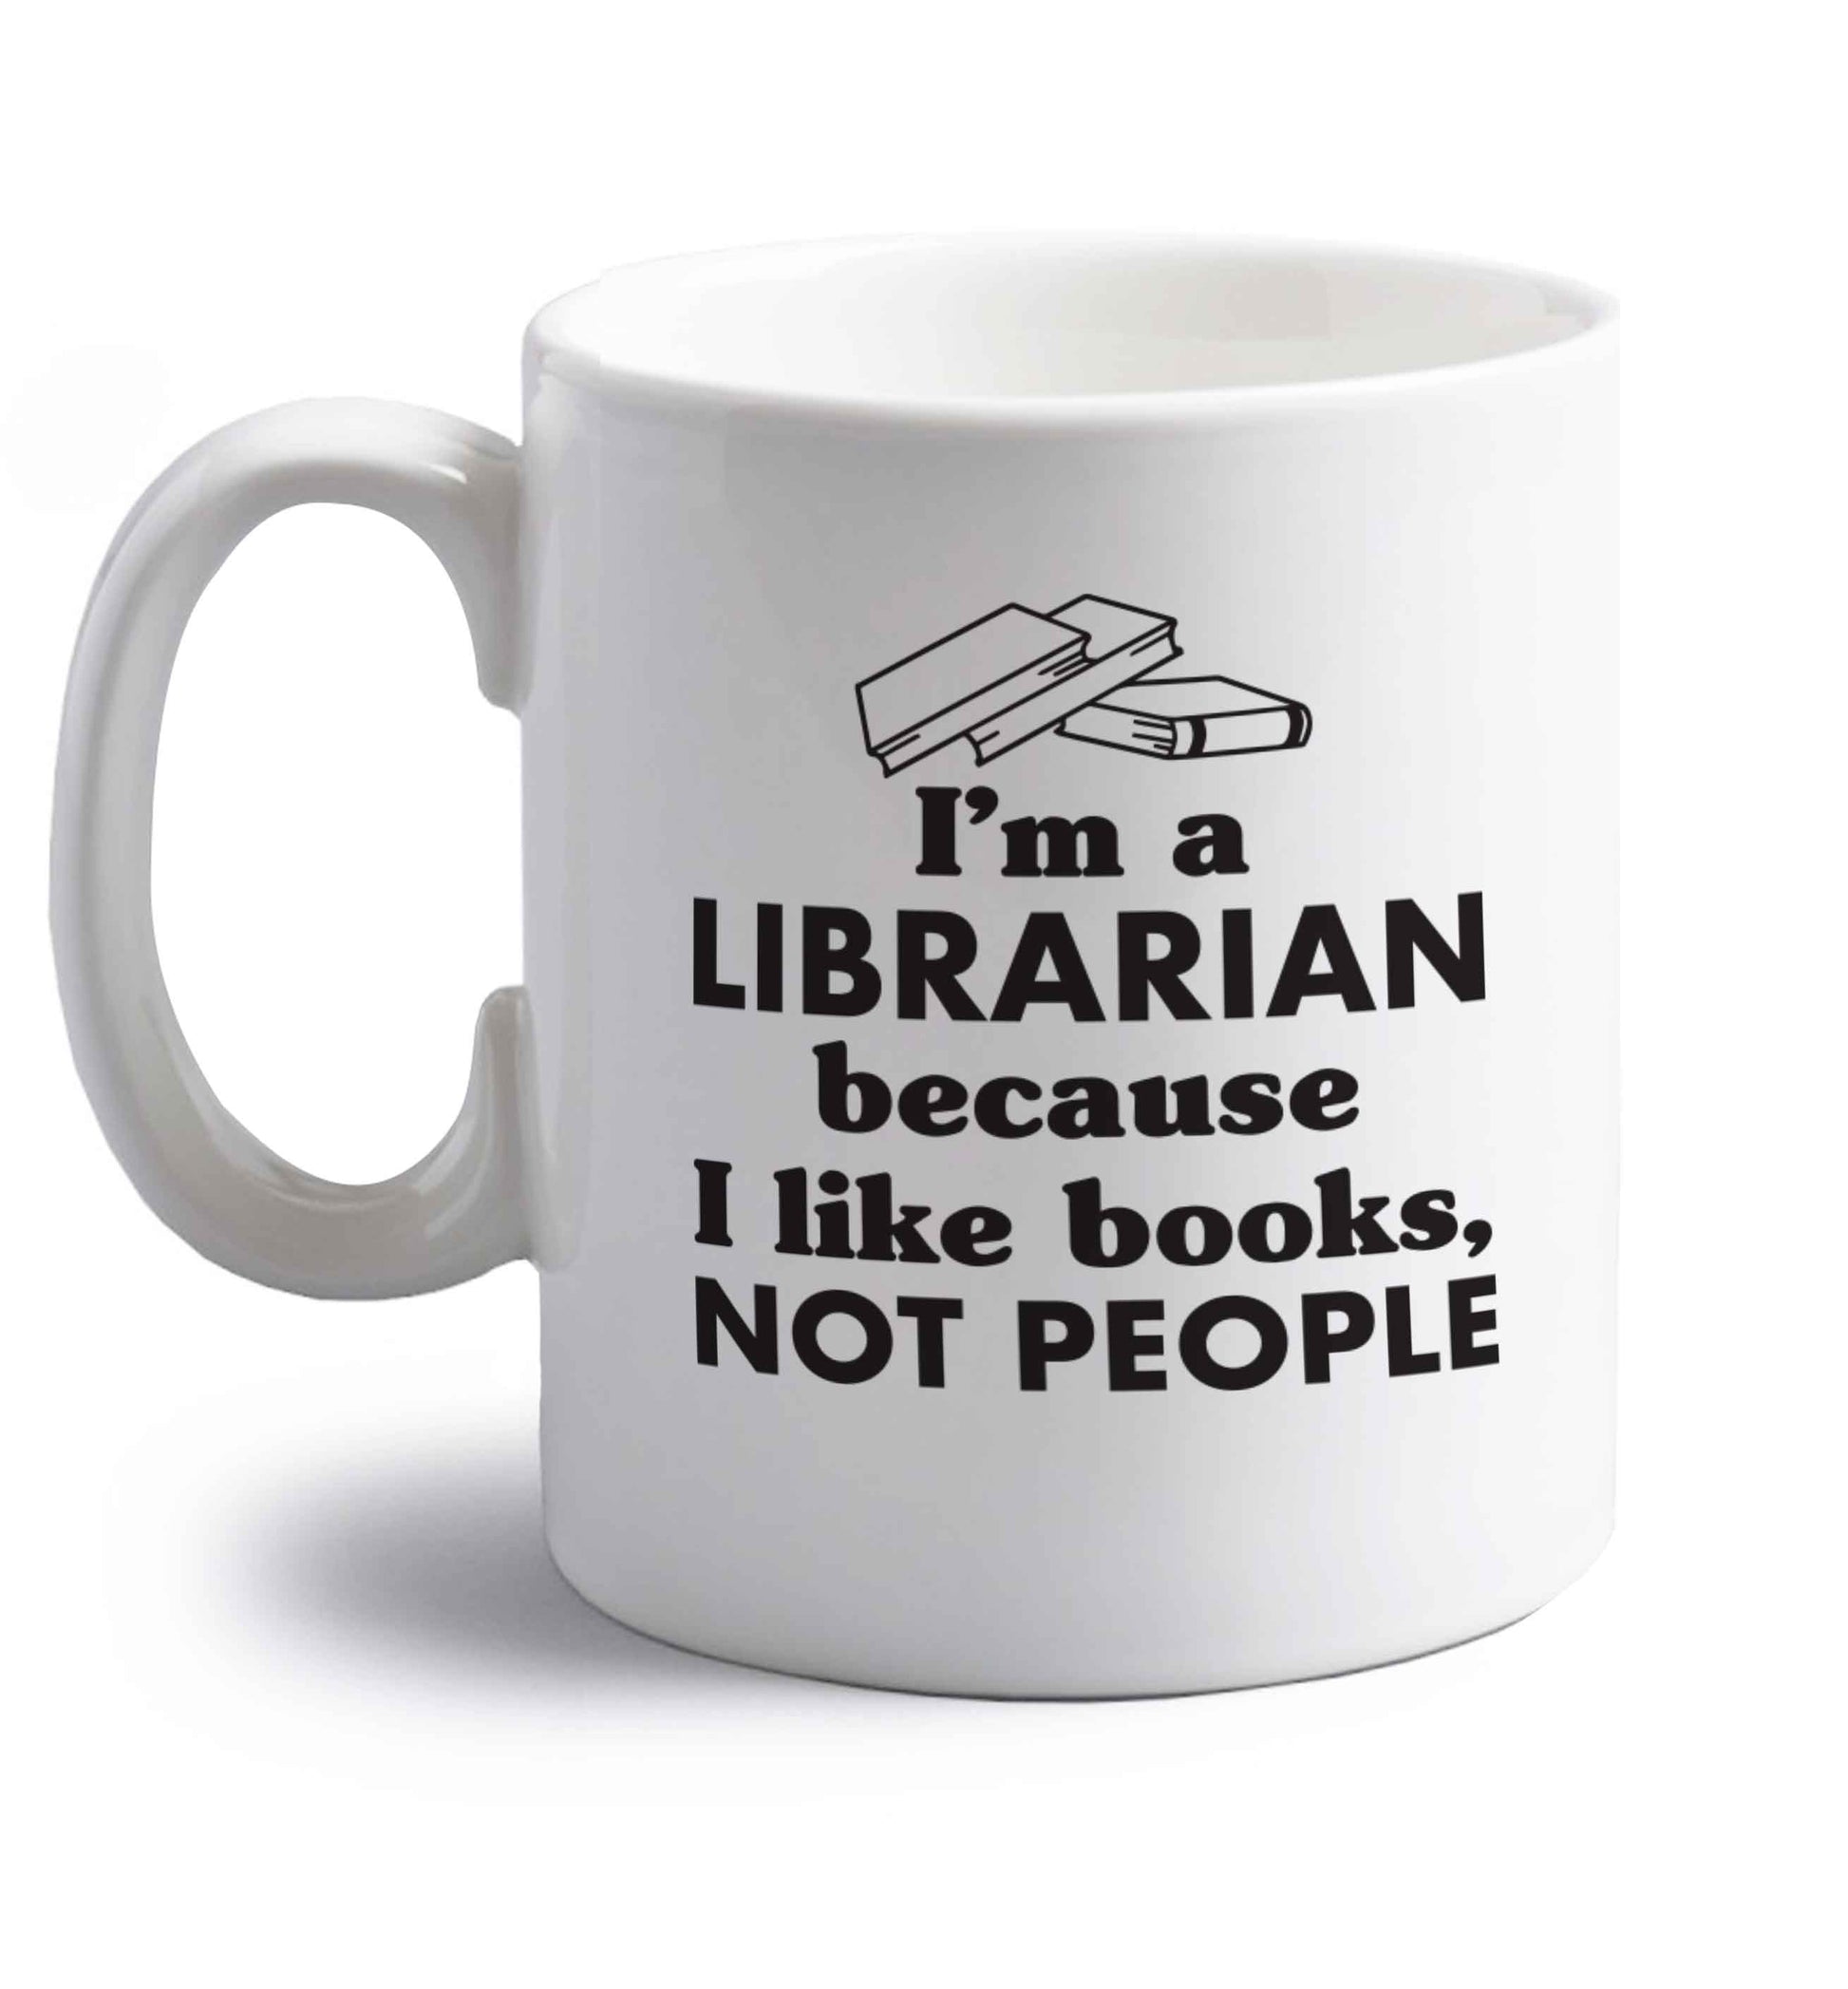 I'm a librarian because I like books not people right handed white ceramic mug 